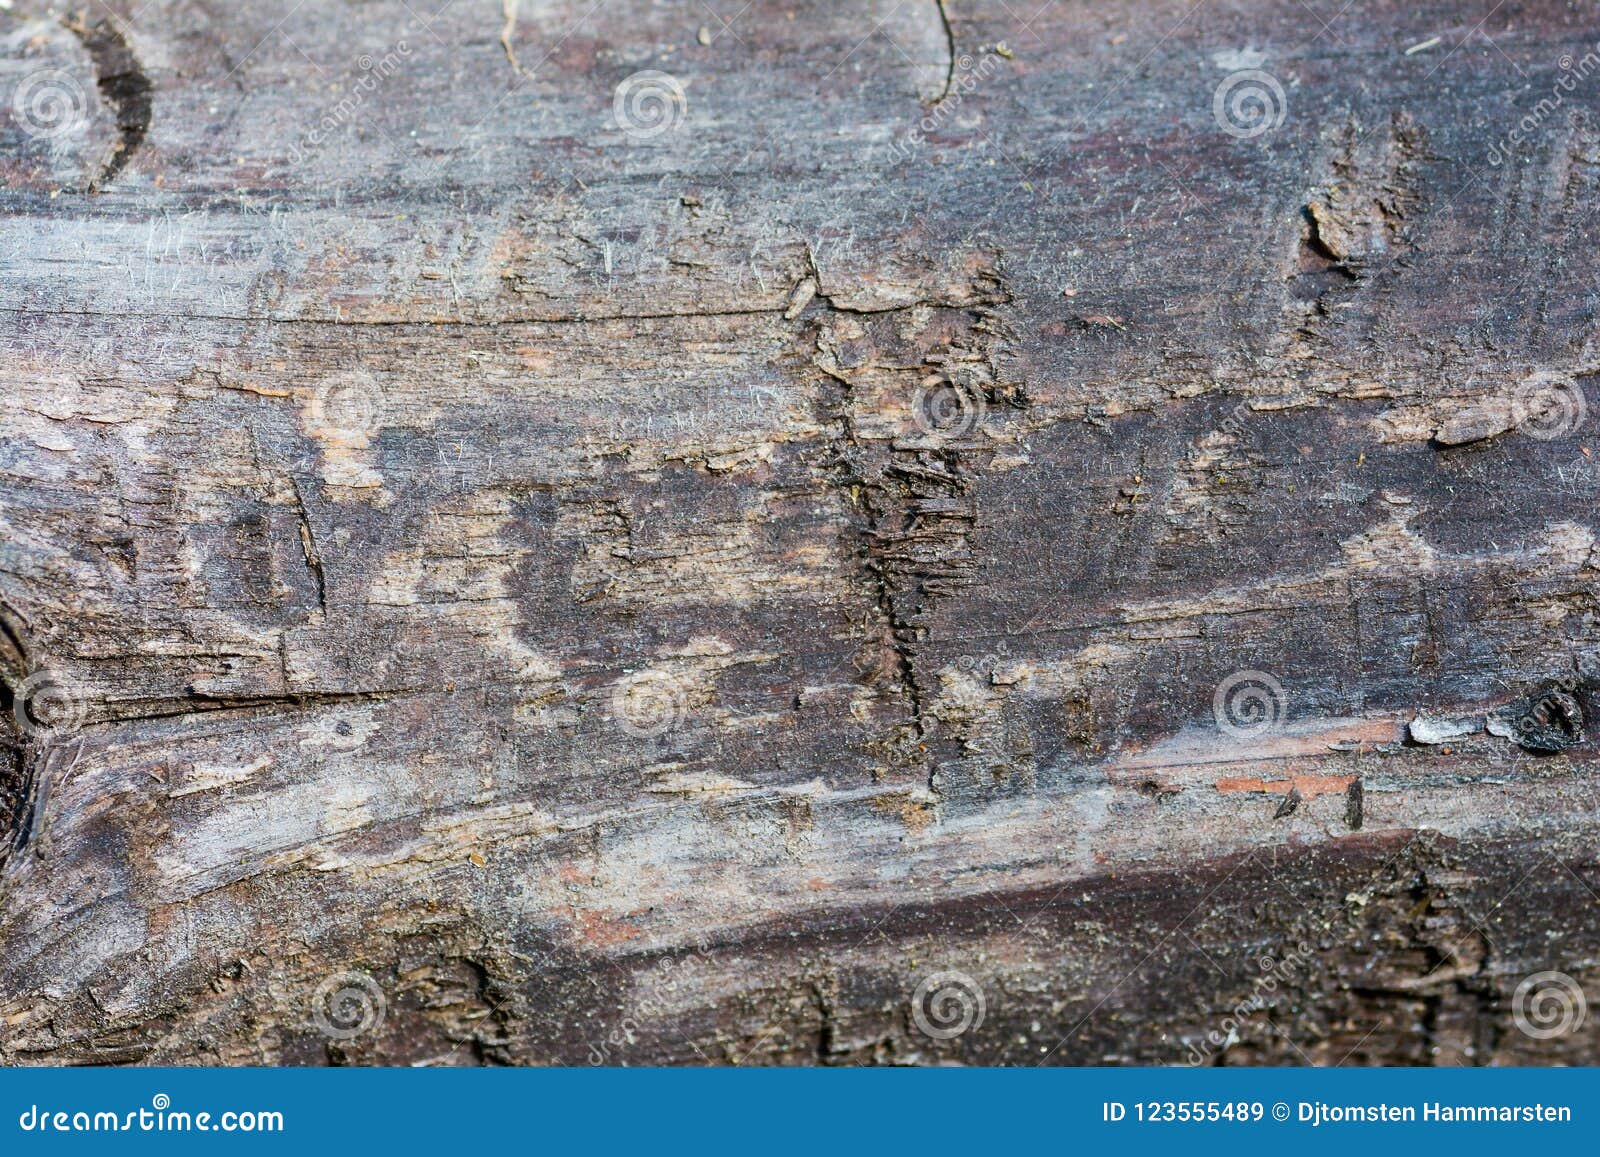 Dark Planks Wood, Differents Patterns and Cracks. Stock Image - Image ...